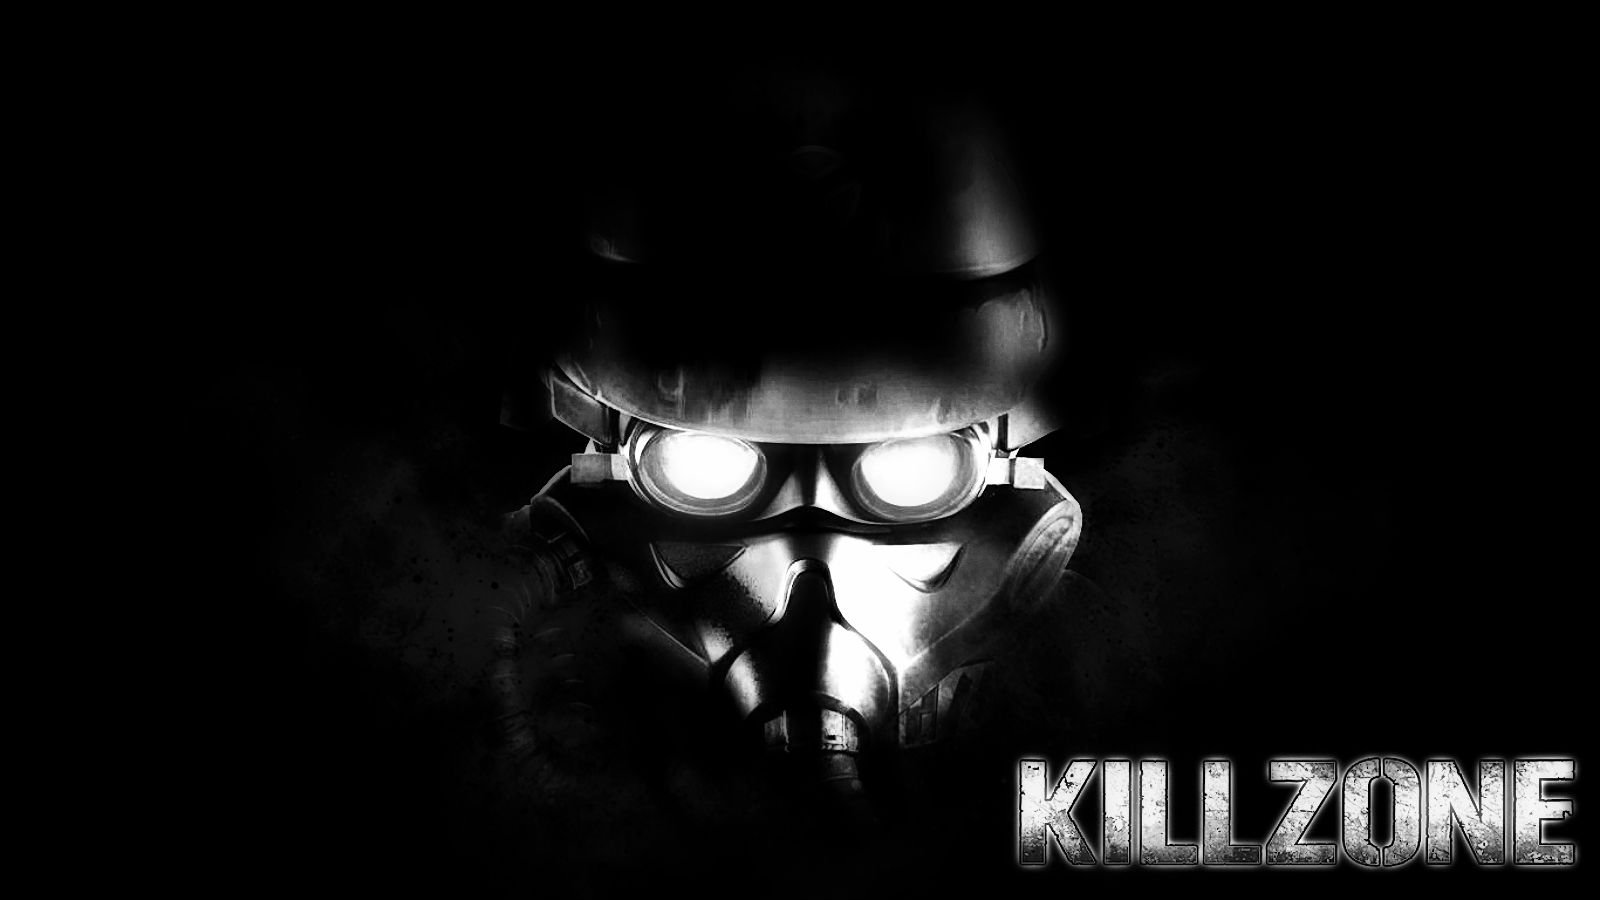 killzone, Stealth, Tactical, Warrior, Sci fi, Futuristic, Shooter, Action, Fighting, Poster Wallpaper